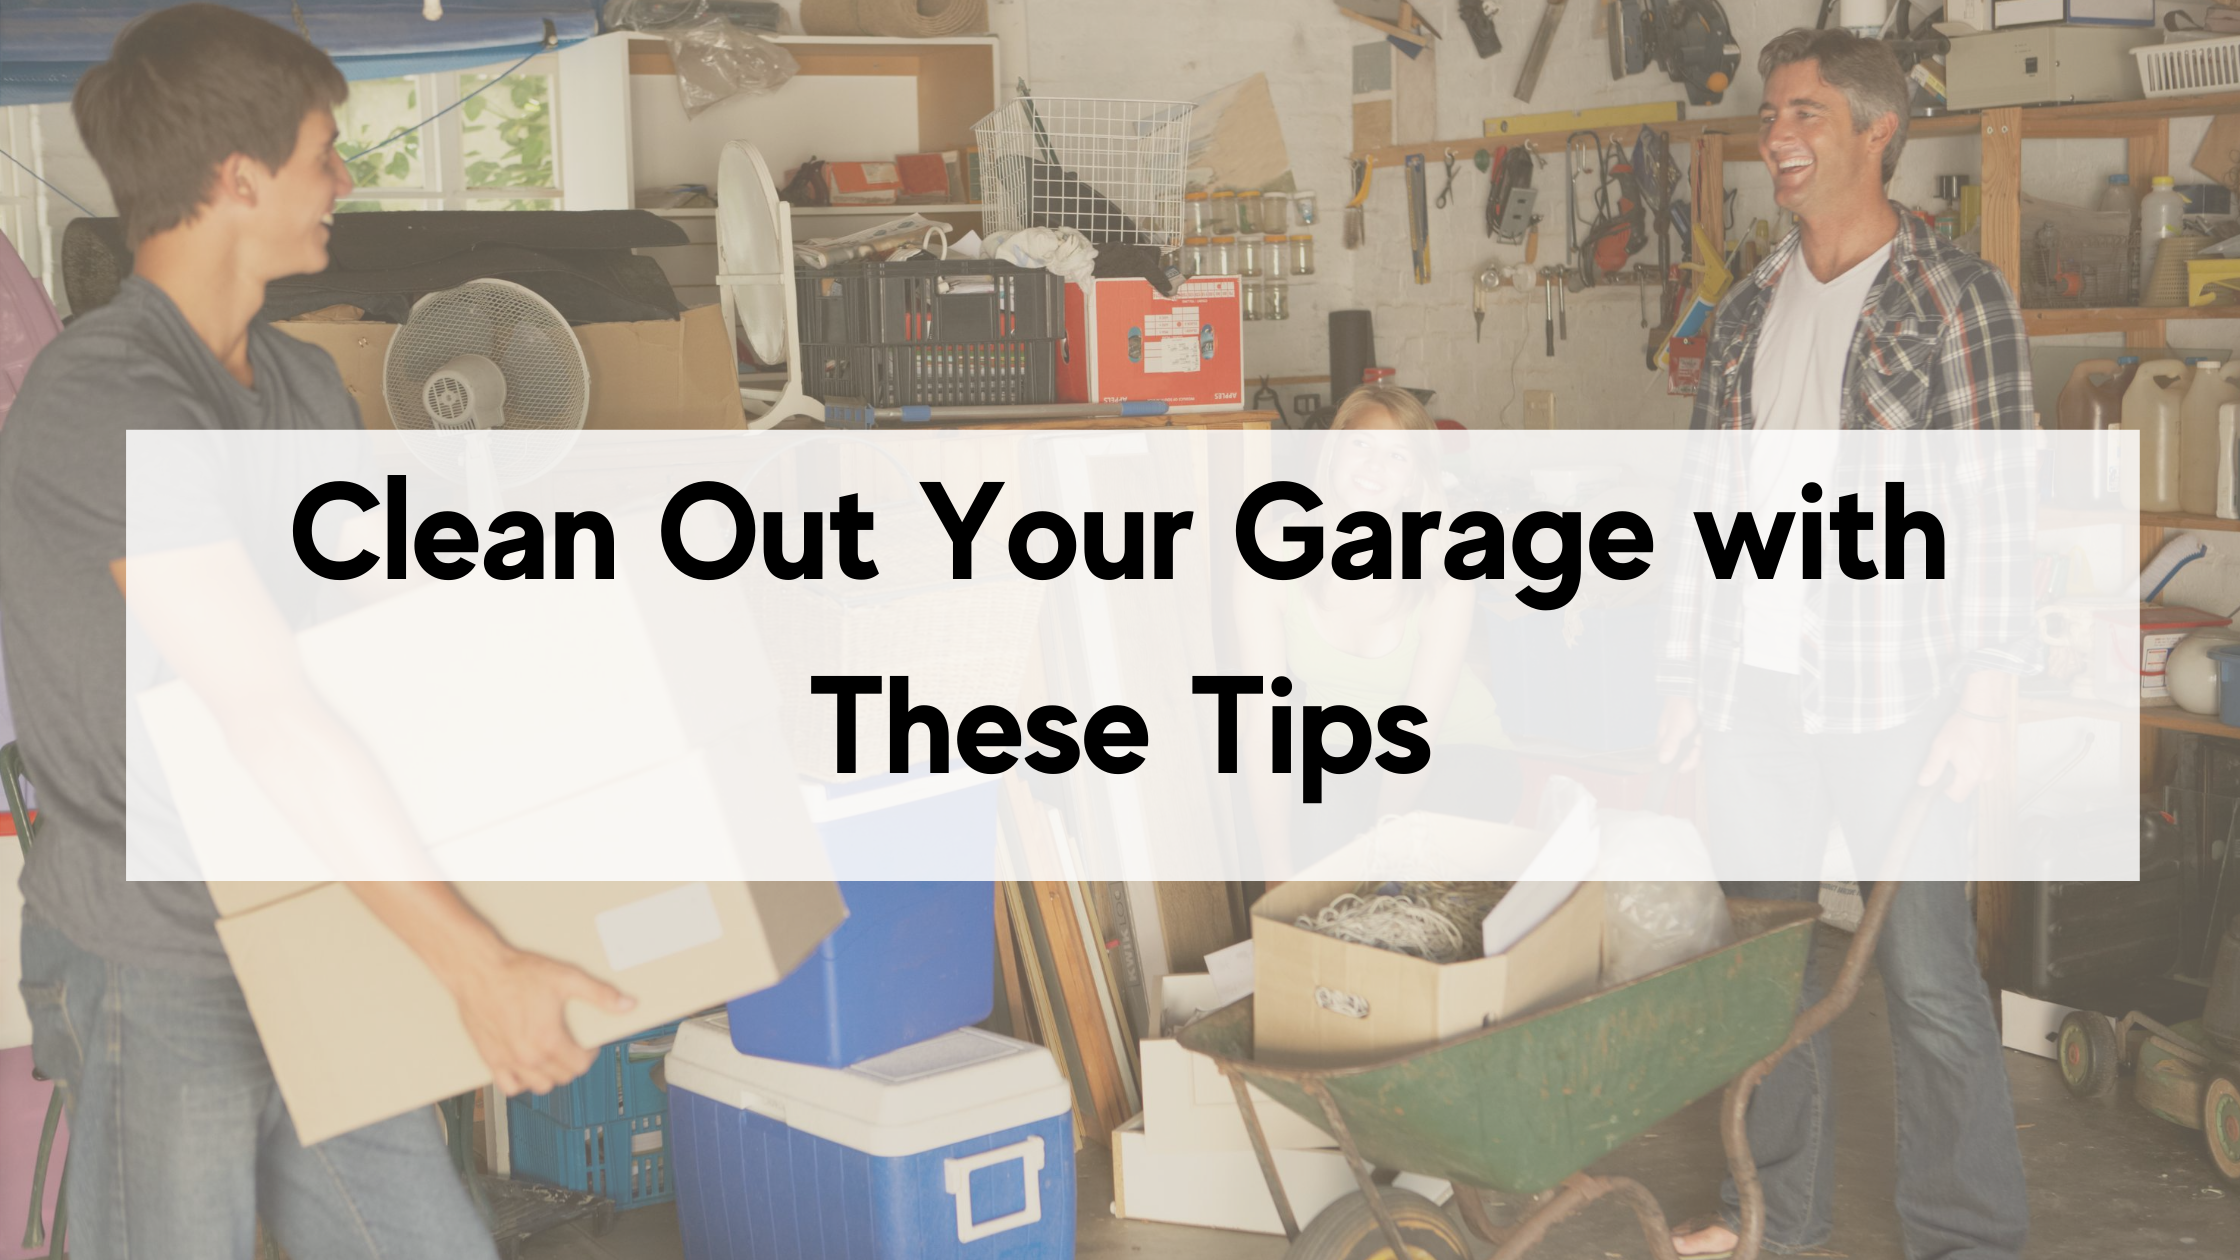 //www.cshelimeet.com/wp-content/uploads/2021/05/Clean-Out-Your-Garage-with-These-Tips.png